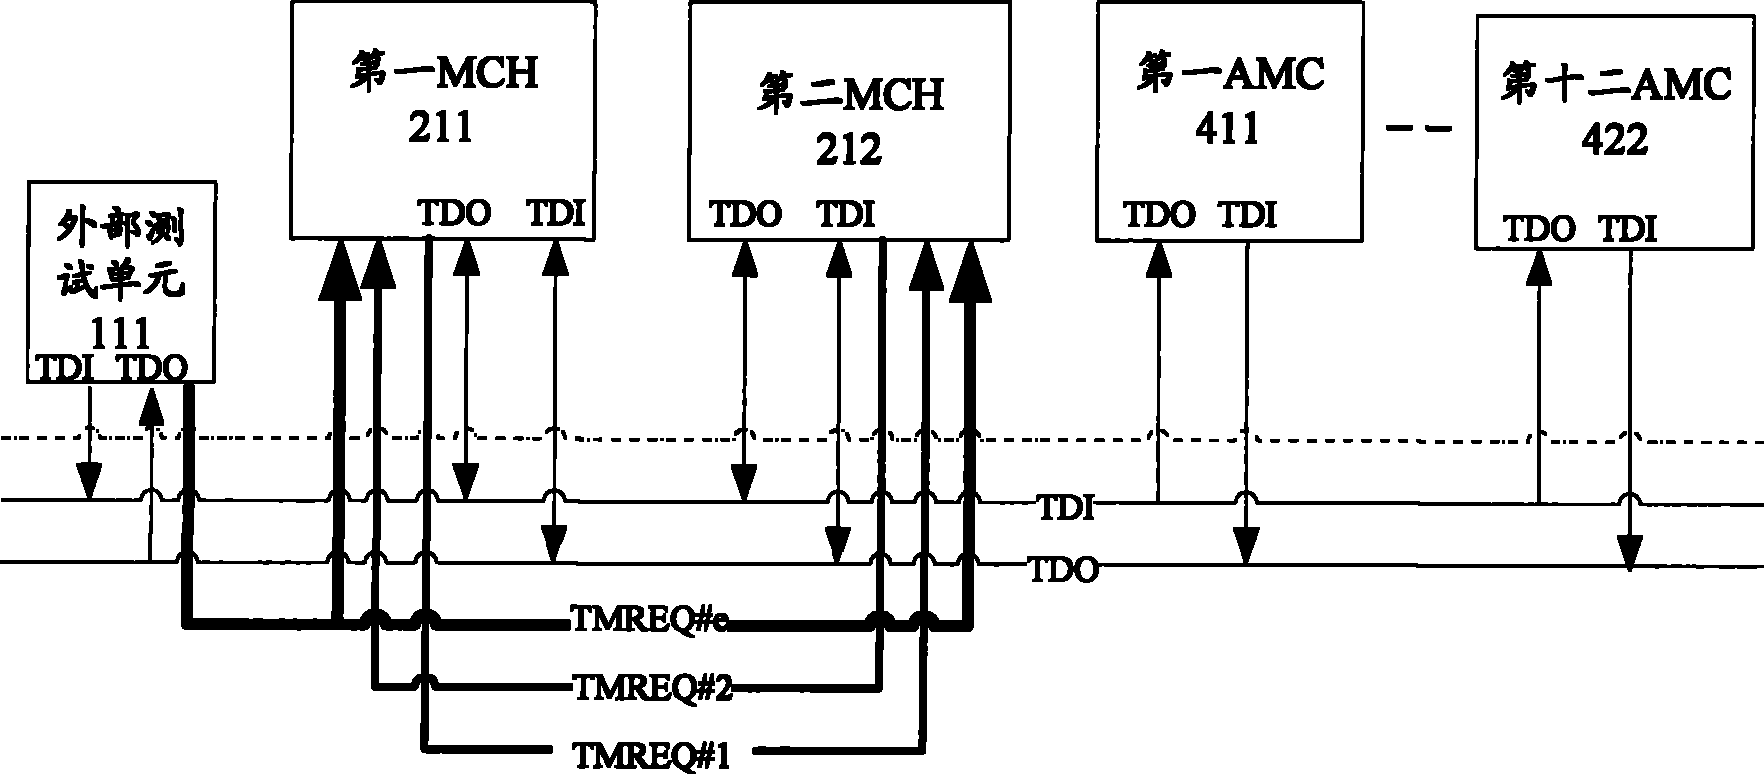 Combined test action group test system of micro-electric communication processing structure